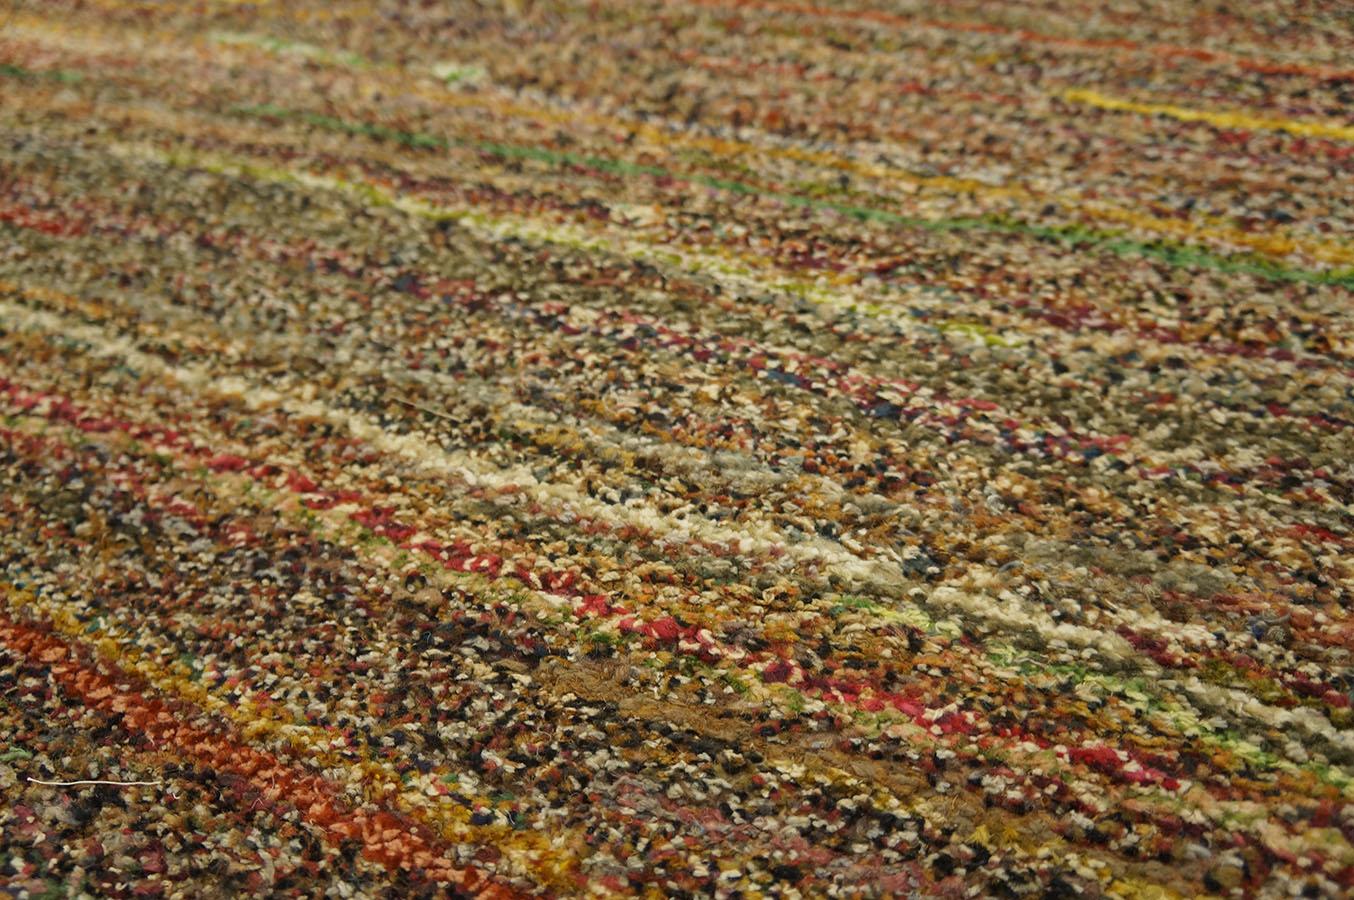 Early 20th Century American Shaker Pile Carpet ( 3' x 23'3